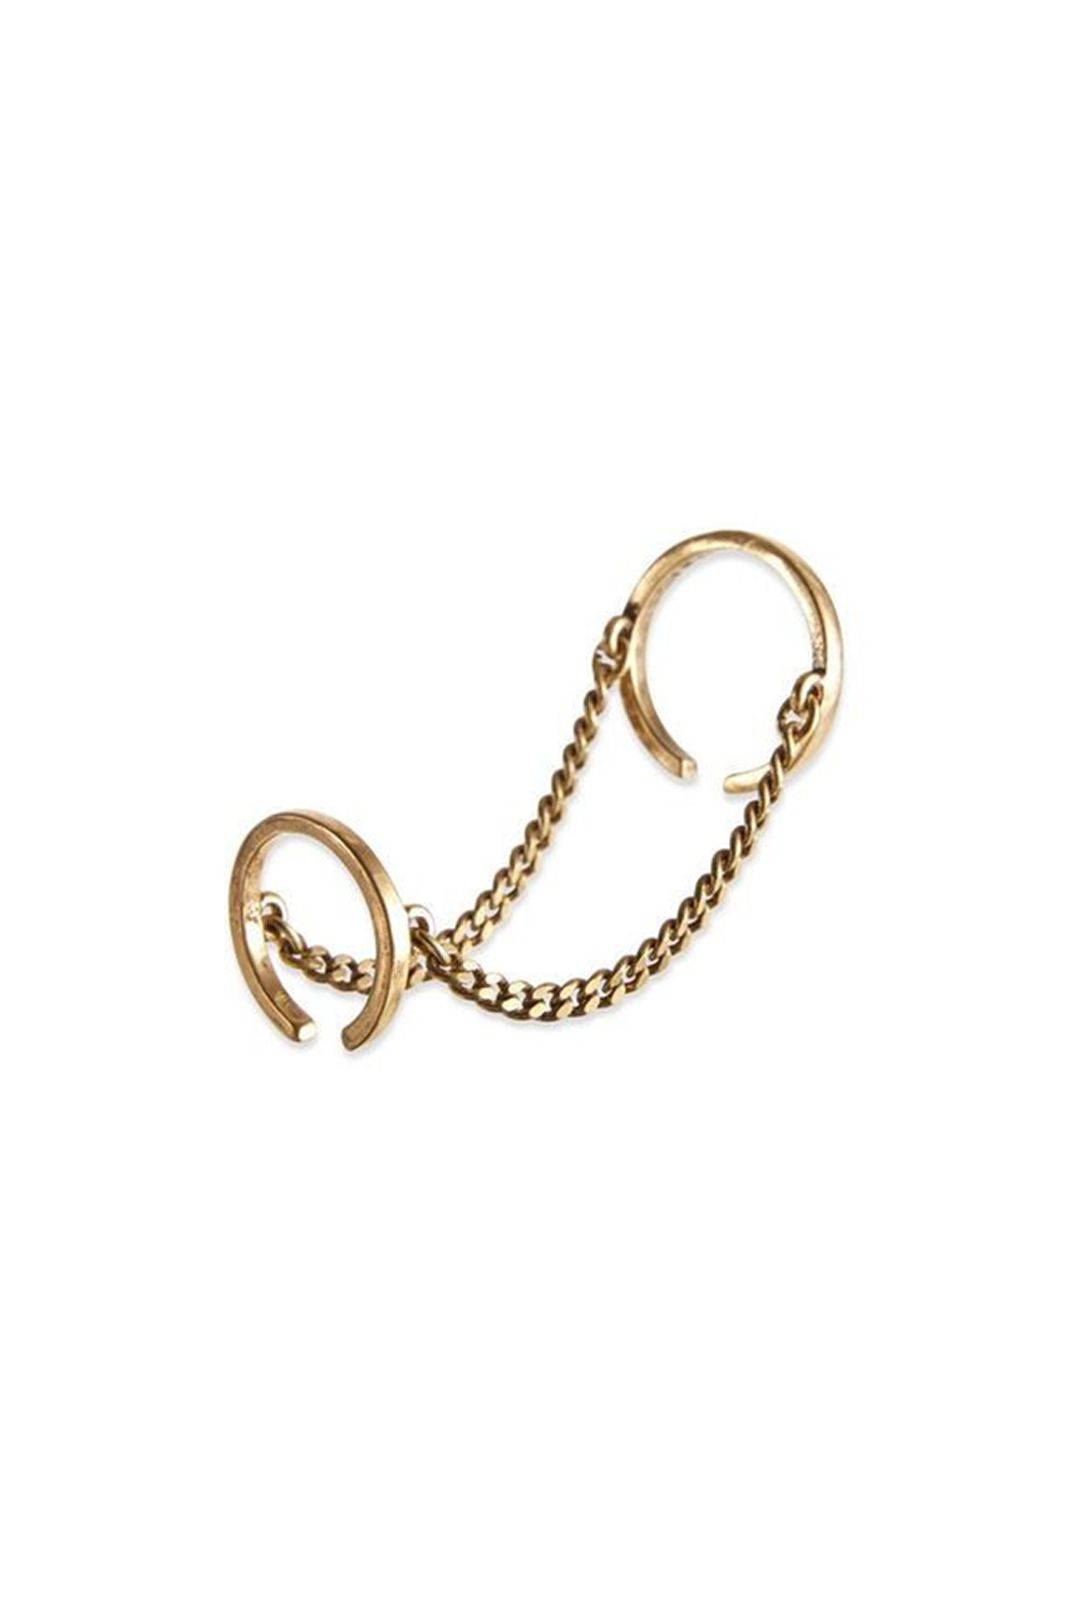 Jenny Bird - Caten Ring - Gold - Front